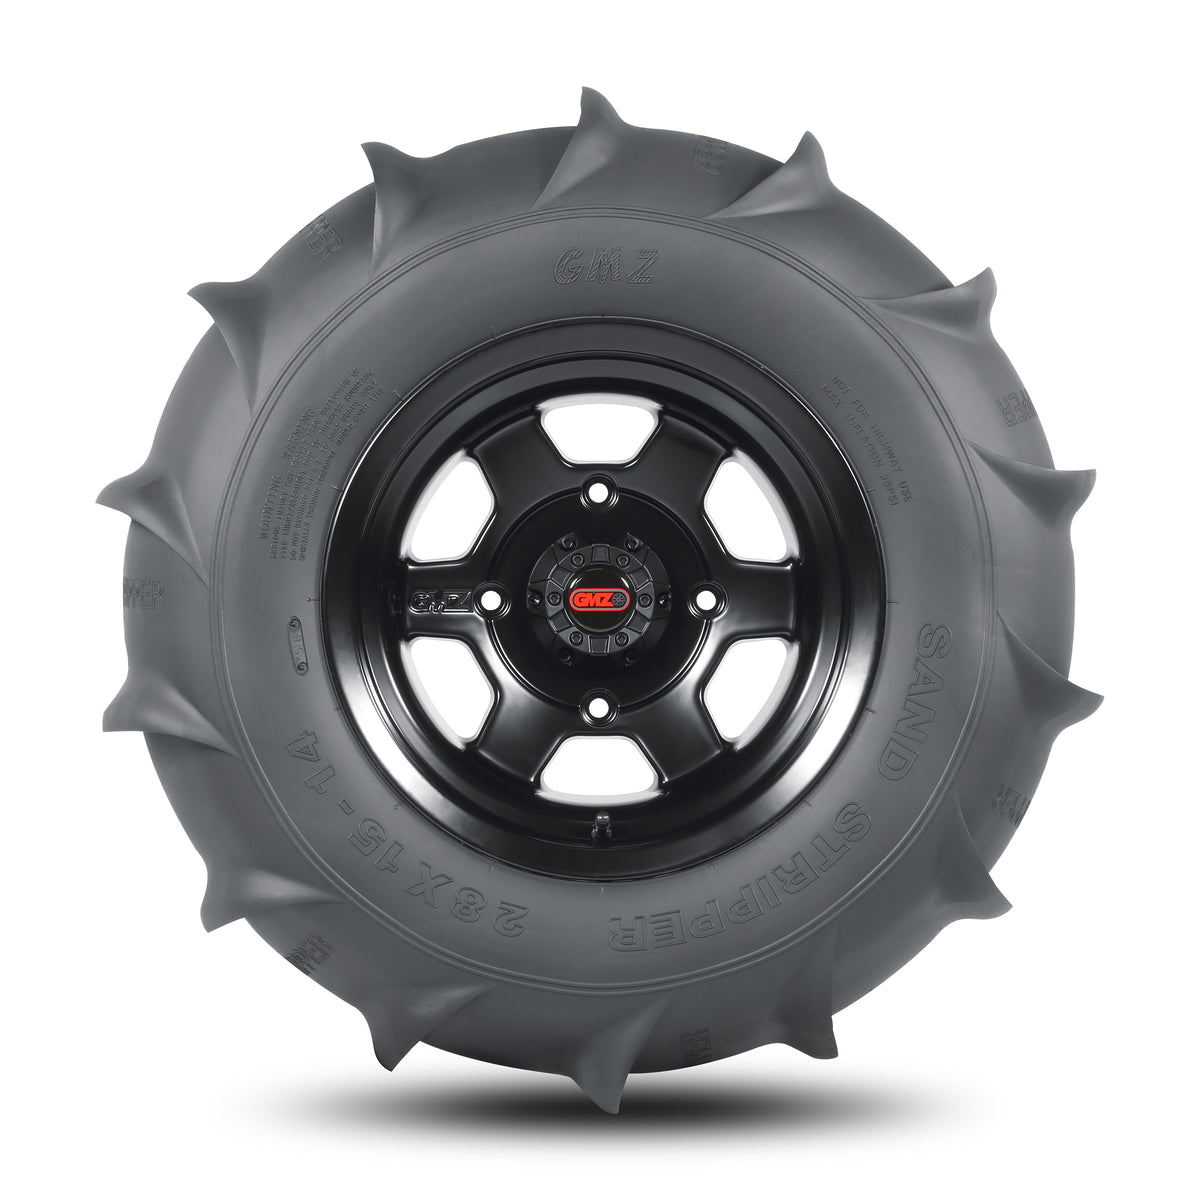 GMZ Sand Stripper Tire 14 Paddle